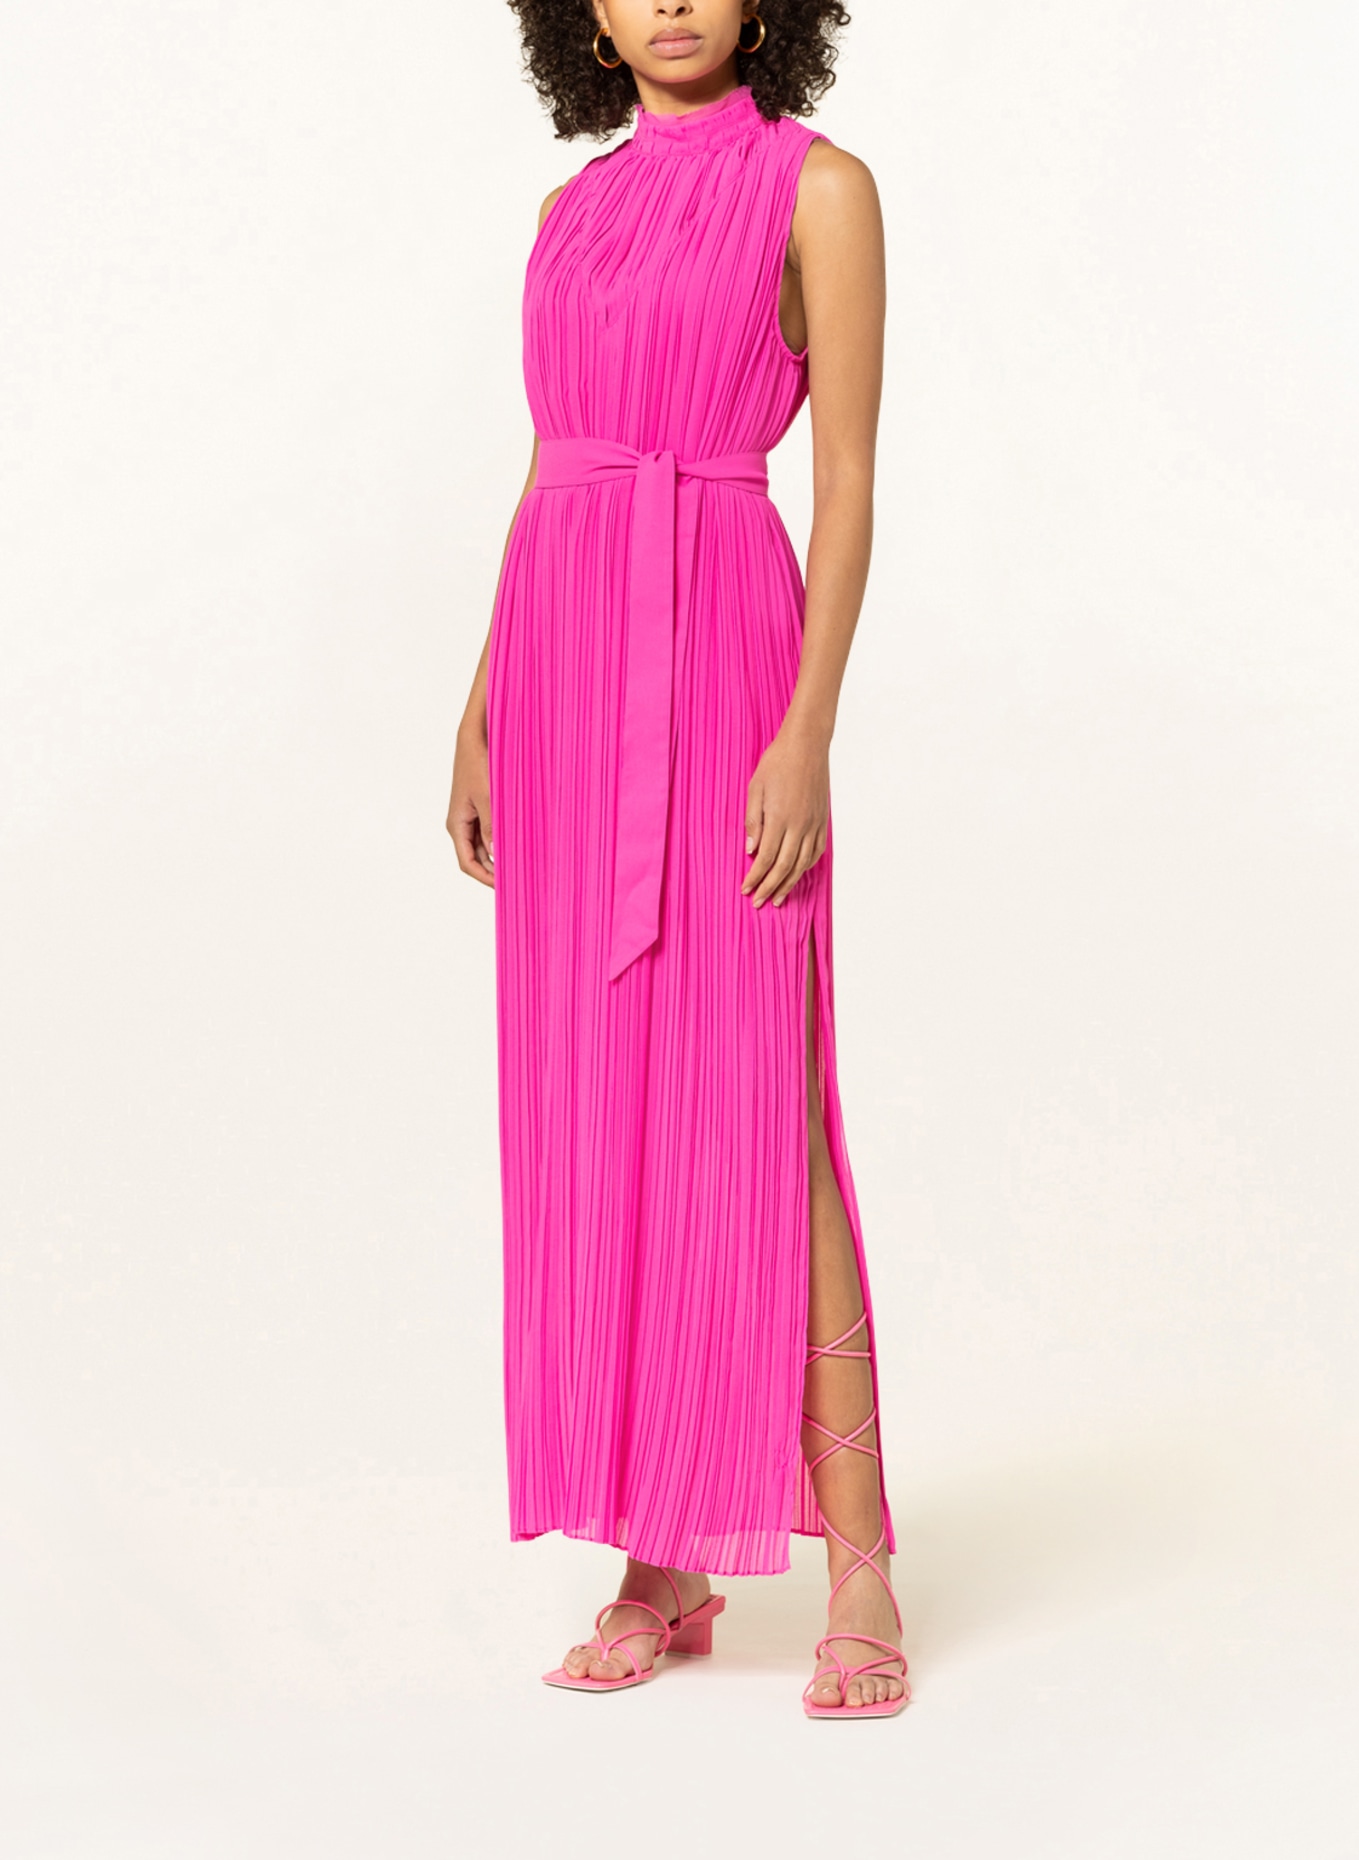 DANTE6 Pleated dress TRIXIE, Color: PINK (Image 2)